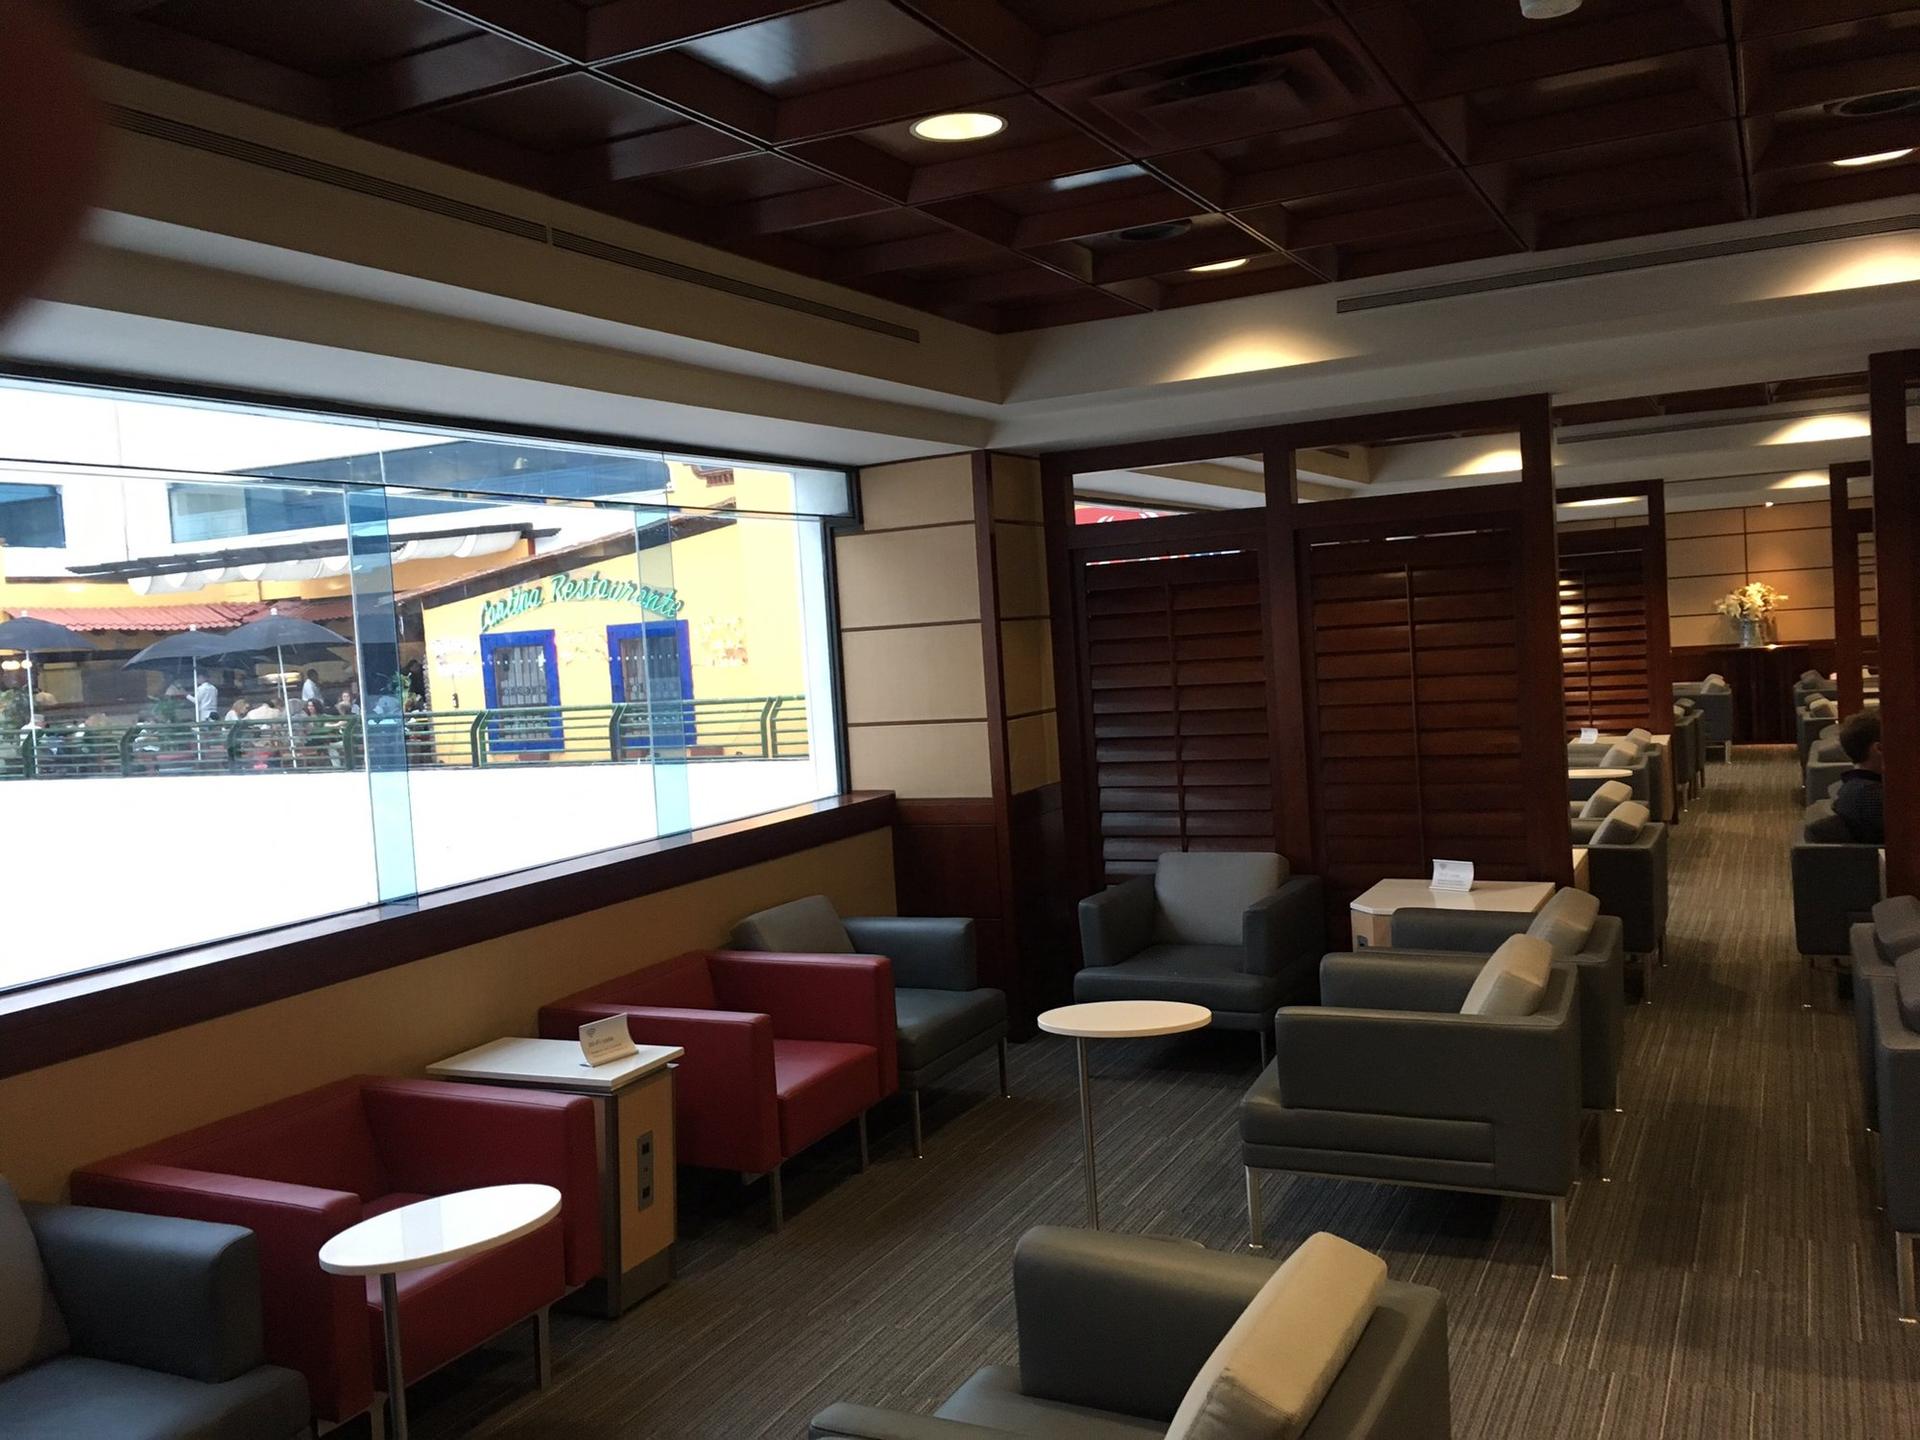 American Airlines Admirals Club image 4 of 32